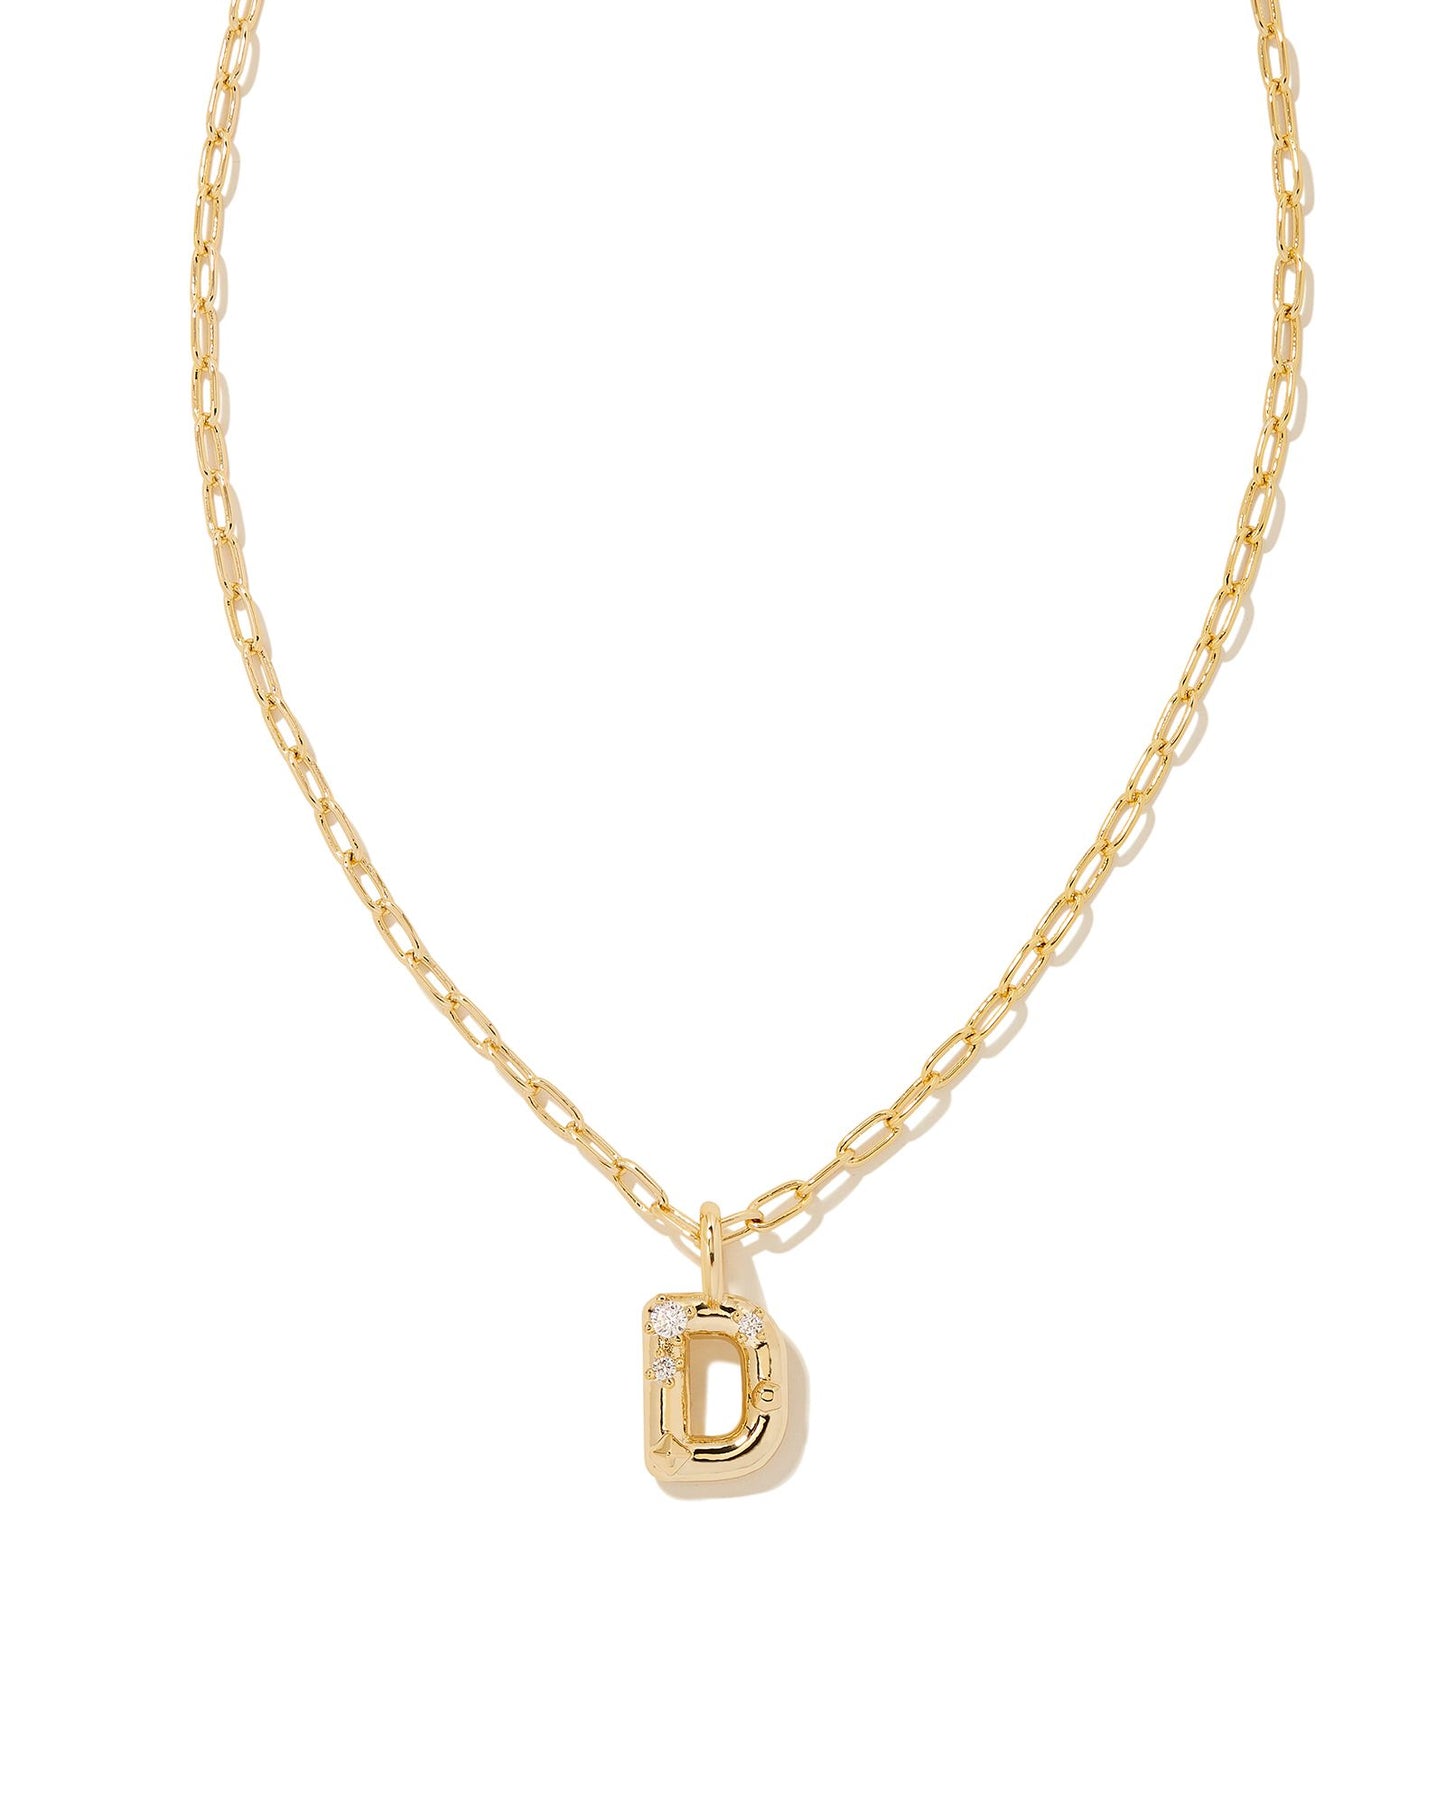 Personalize your everyday look with the Crystal Letter Short Pendant Necklace in White Crystal. Whether you’re rocking your initial or a loved one’s, this sentimental layer is one you’ll keep coming back to again and again.  Dimensions- 16' CHAIN WITH 3' EXTENDER, 0.62'L X 0.35"W PENDANT Metal- 14K Gold plated over brass Closure- Lobster Clasp Material-   White CZ Letter D